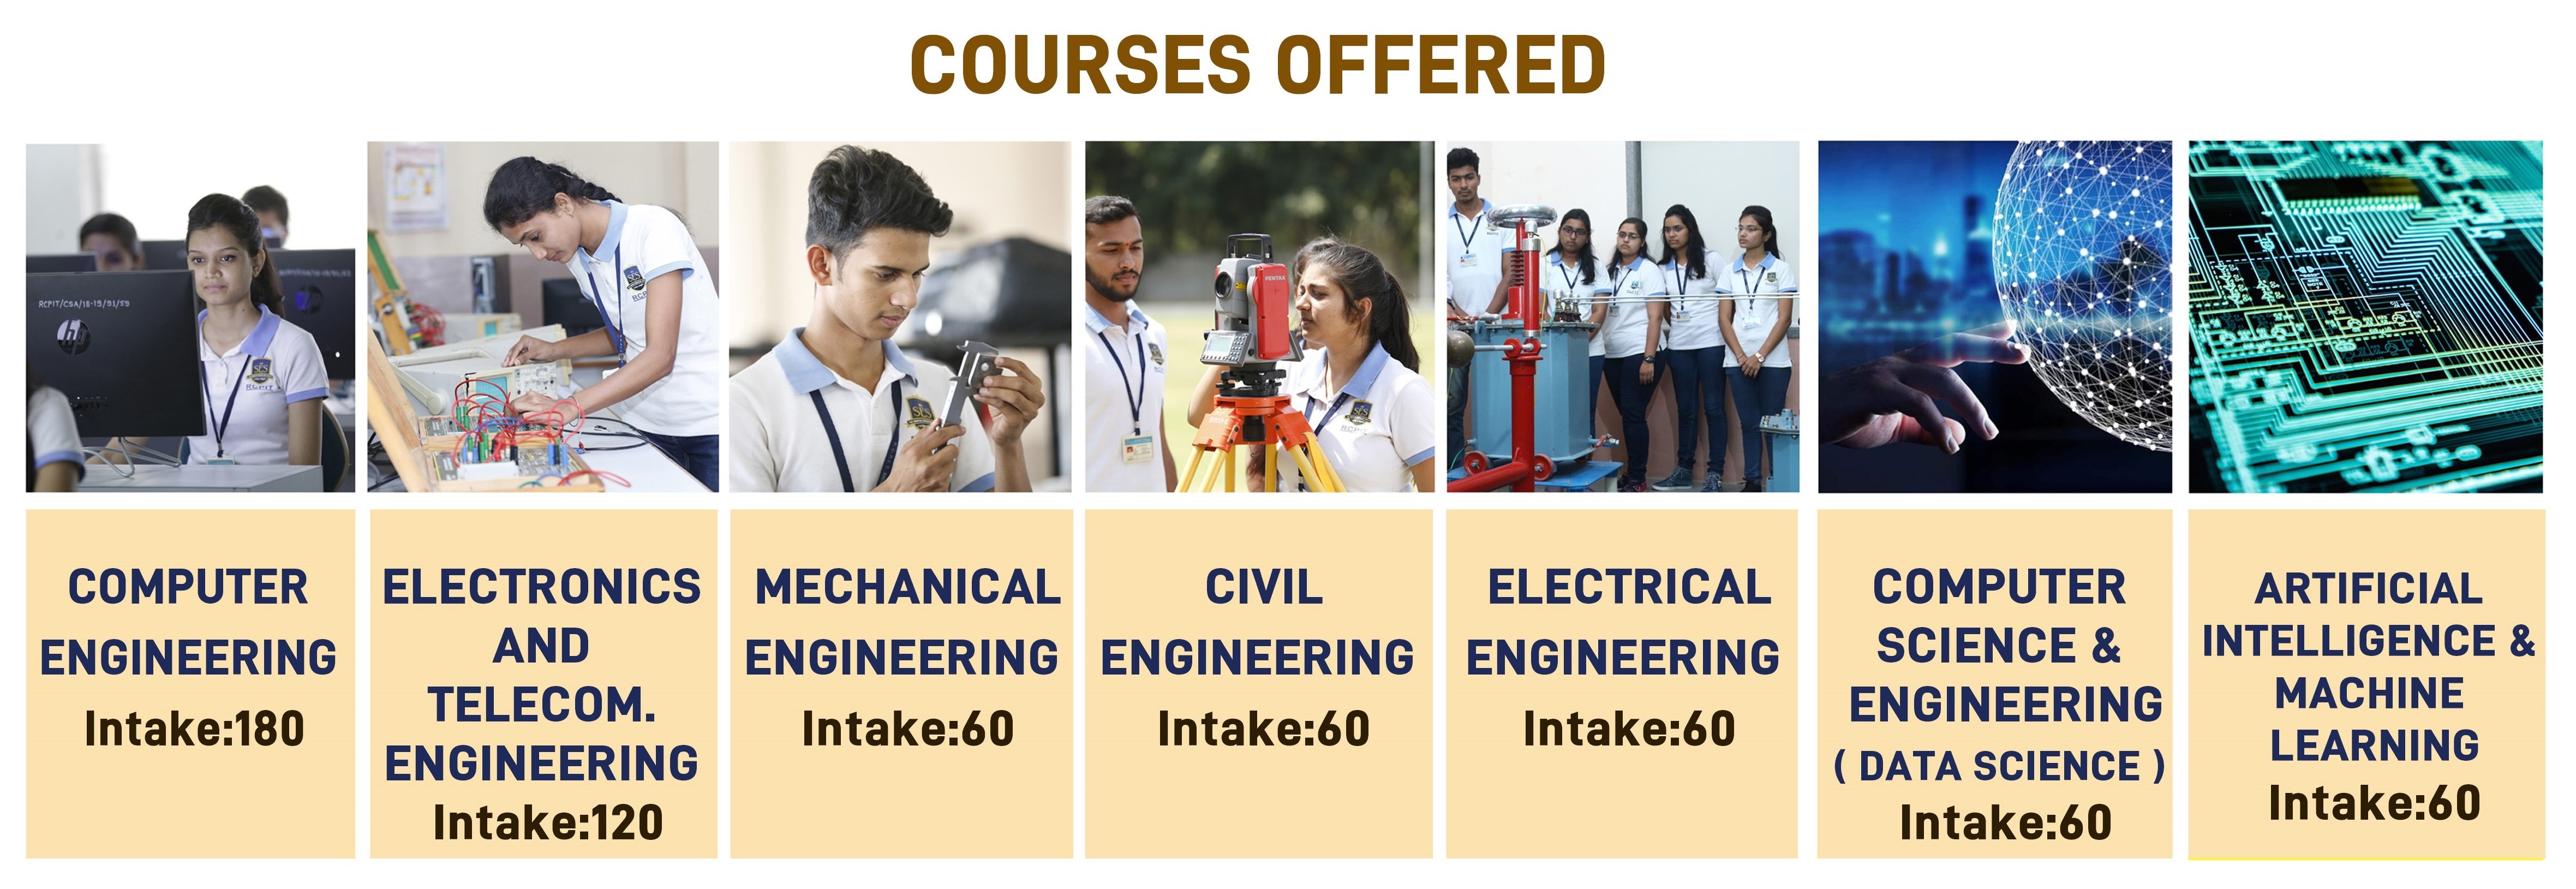 courses-offered